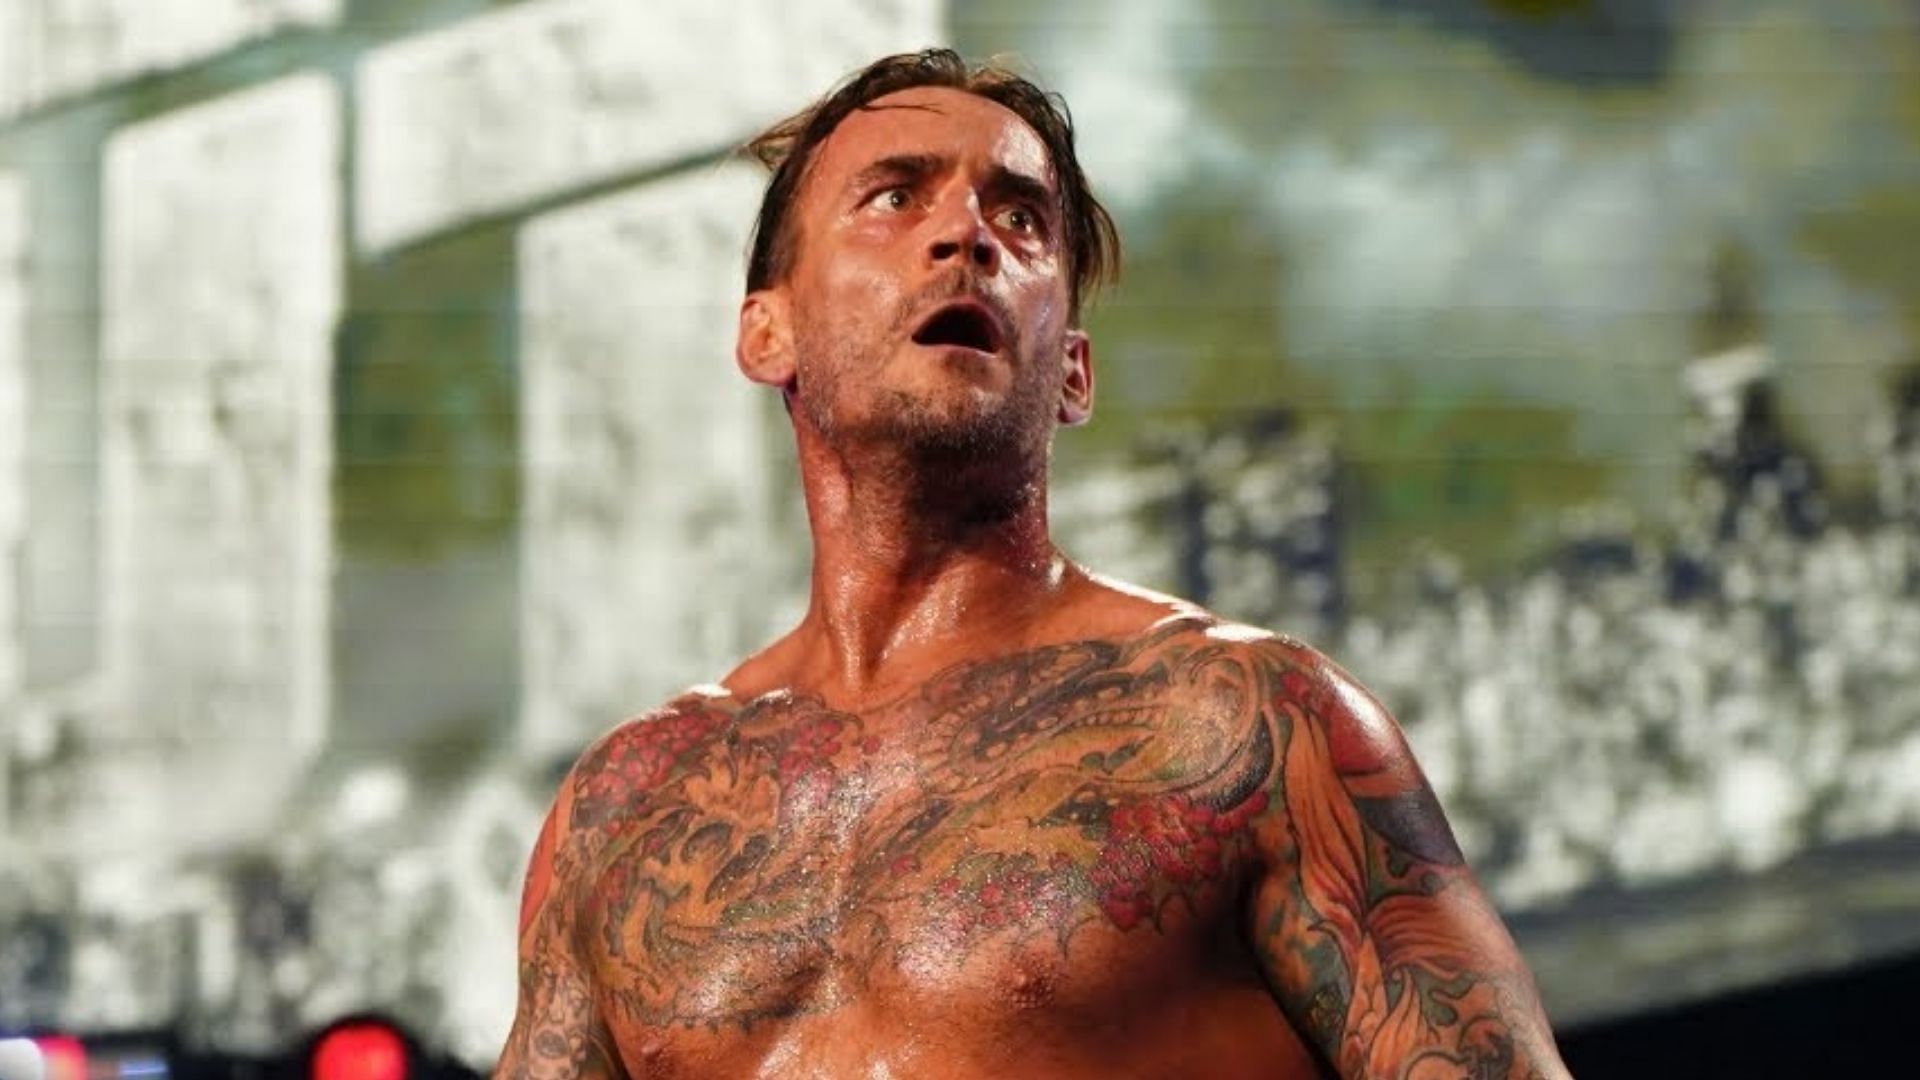 CM Punk is a former AEW and WWE World Champion